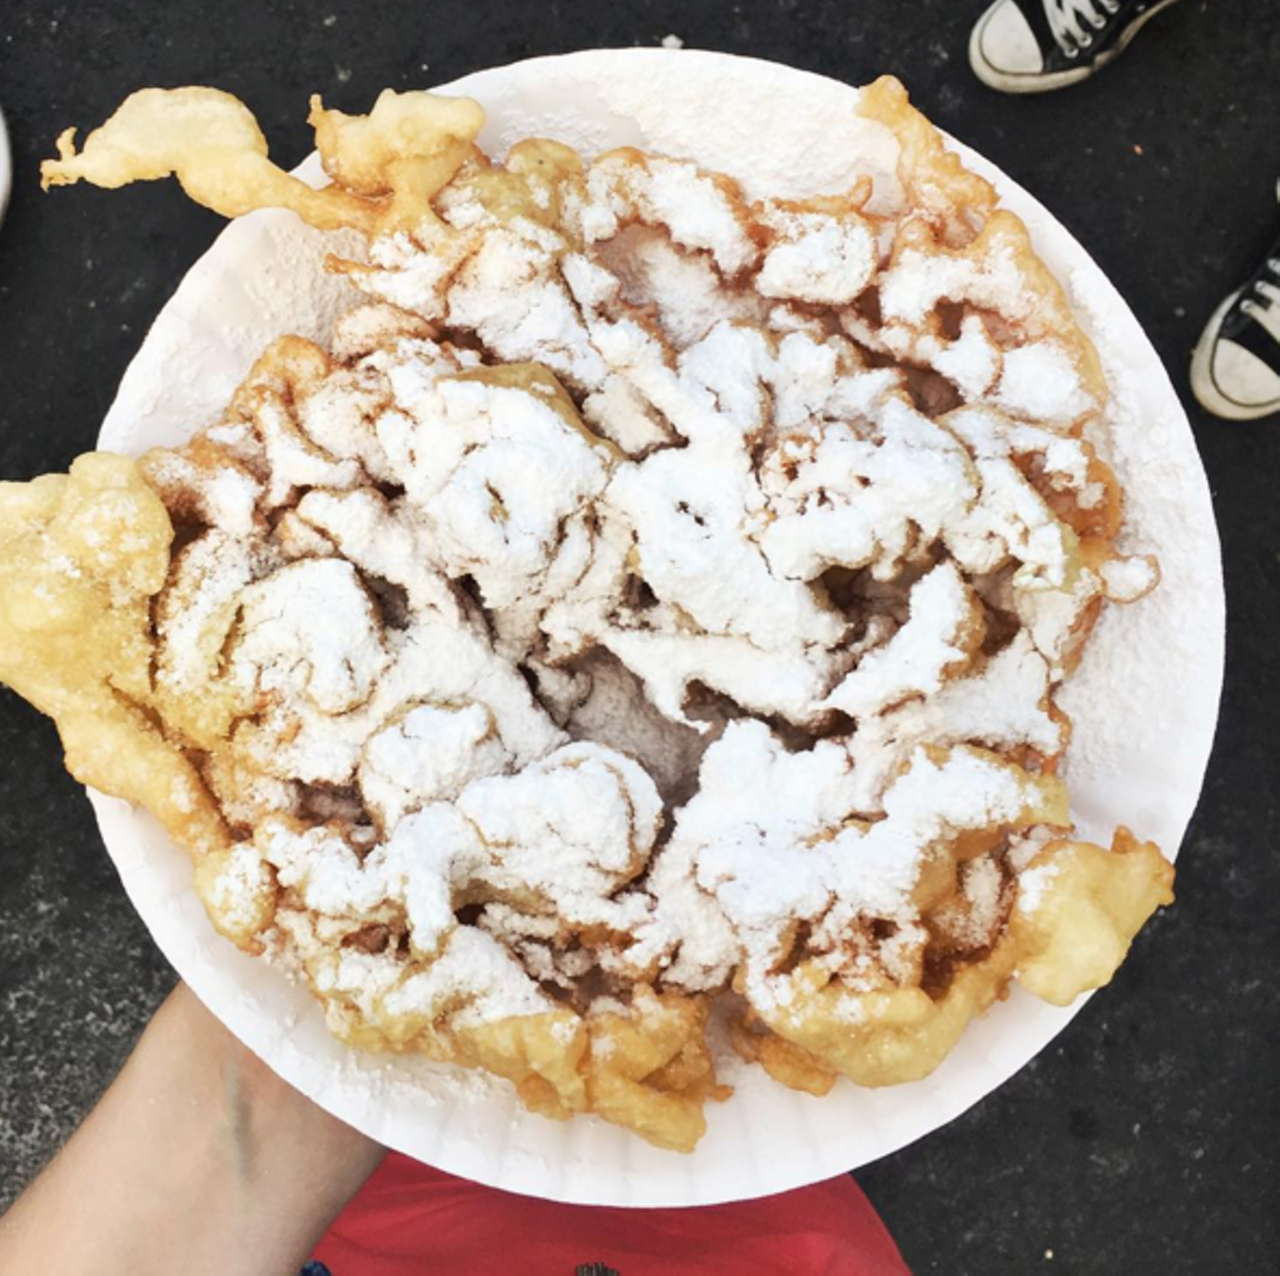 Just look at the fried sugary goodness. 
Photo via Instgram/eat_it_b